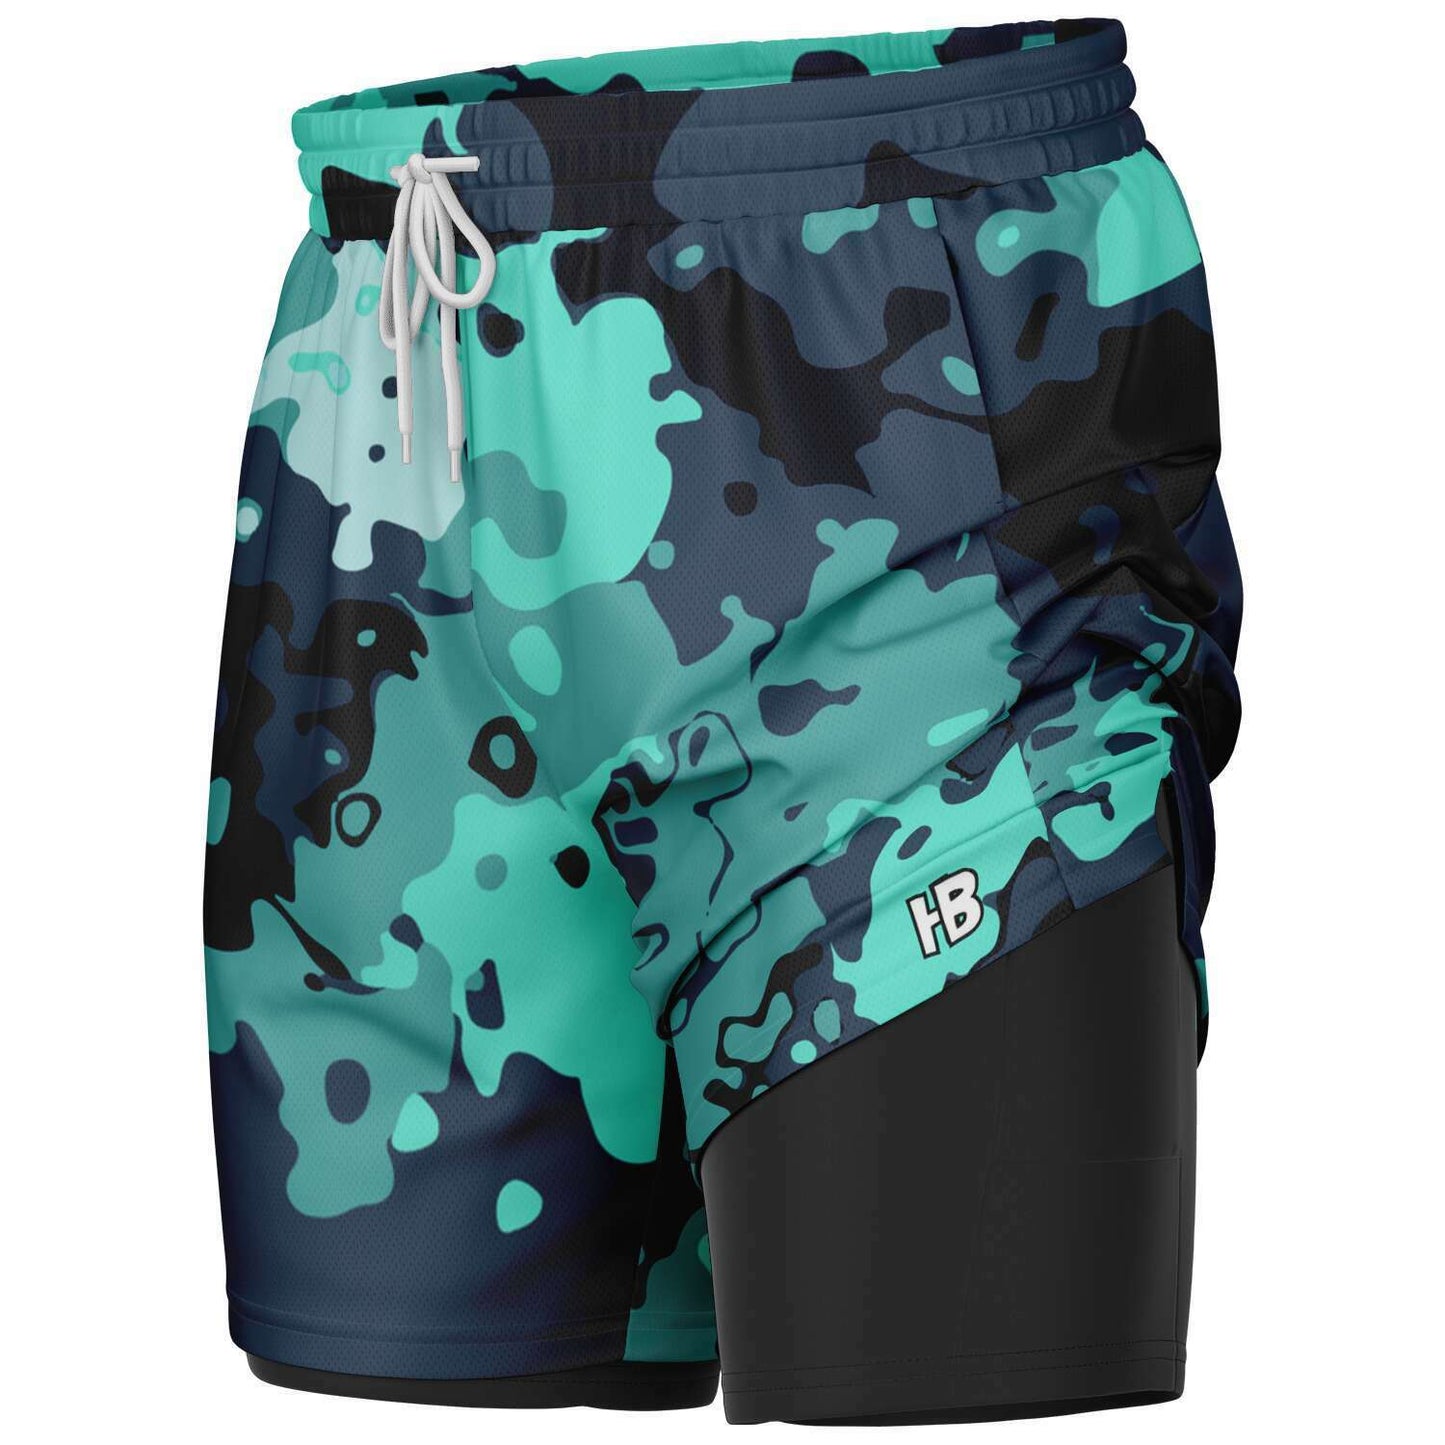 CrazY cAmO mEn AnD wOmEn's 2 In 1 ShOrTs